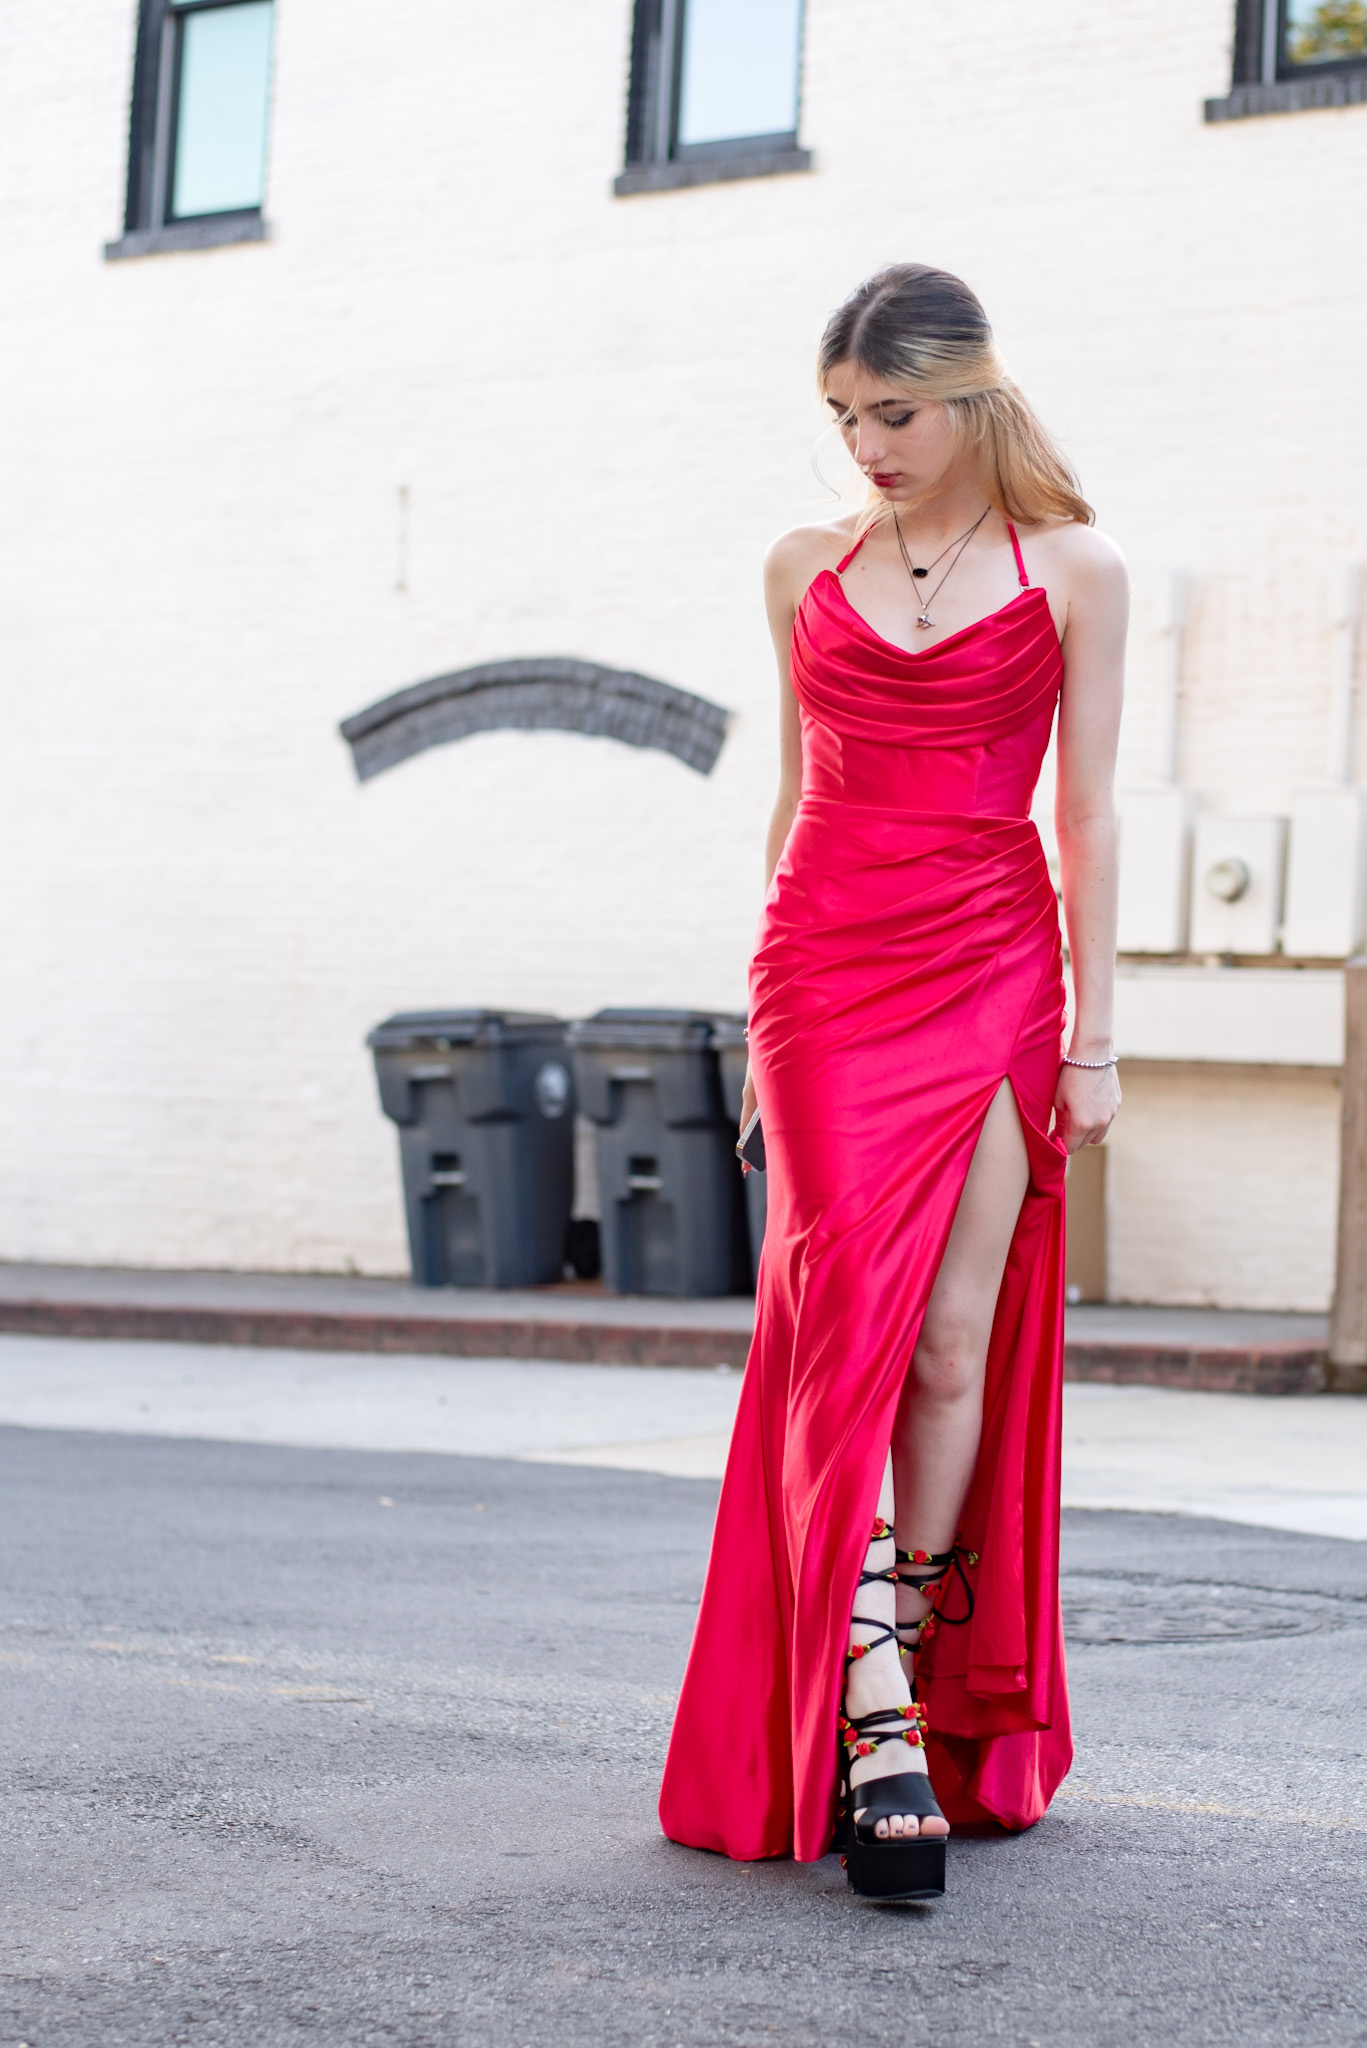 red dress, satin red dress, red prom dress, red homecoming cowl neck dress, lace up shoes with roses